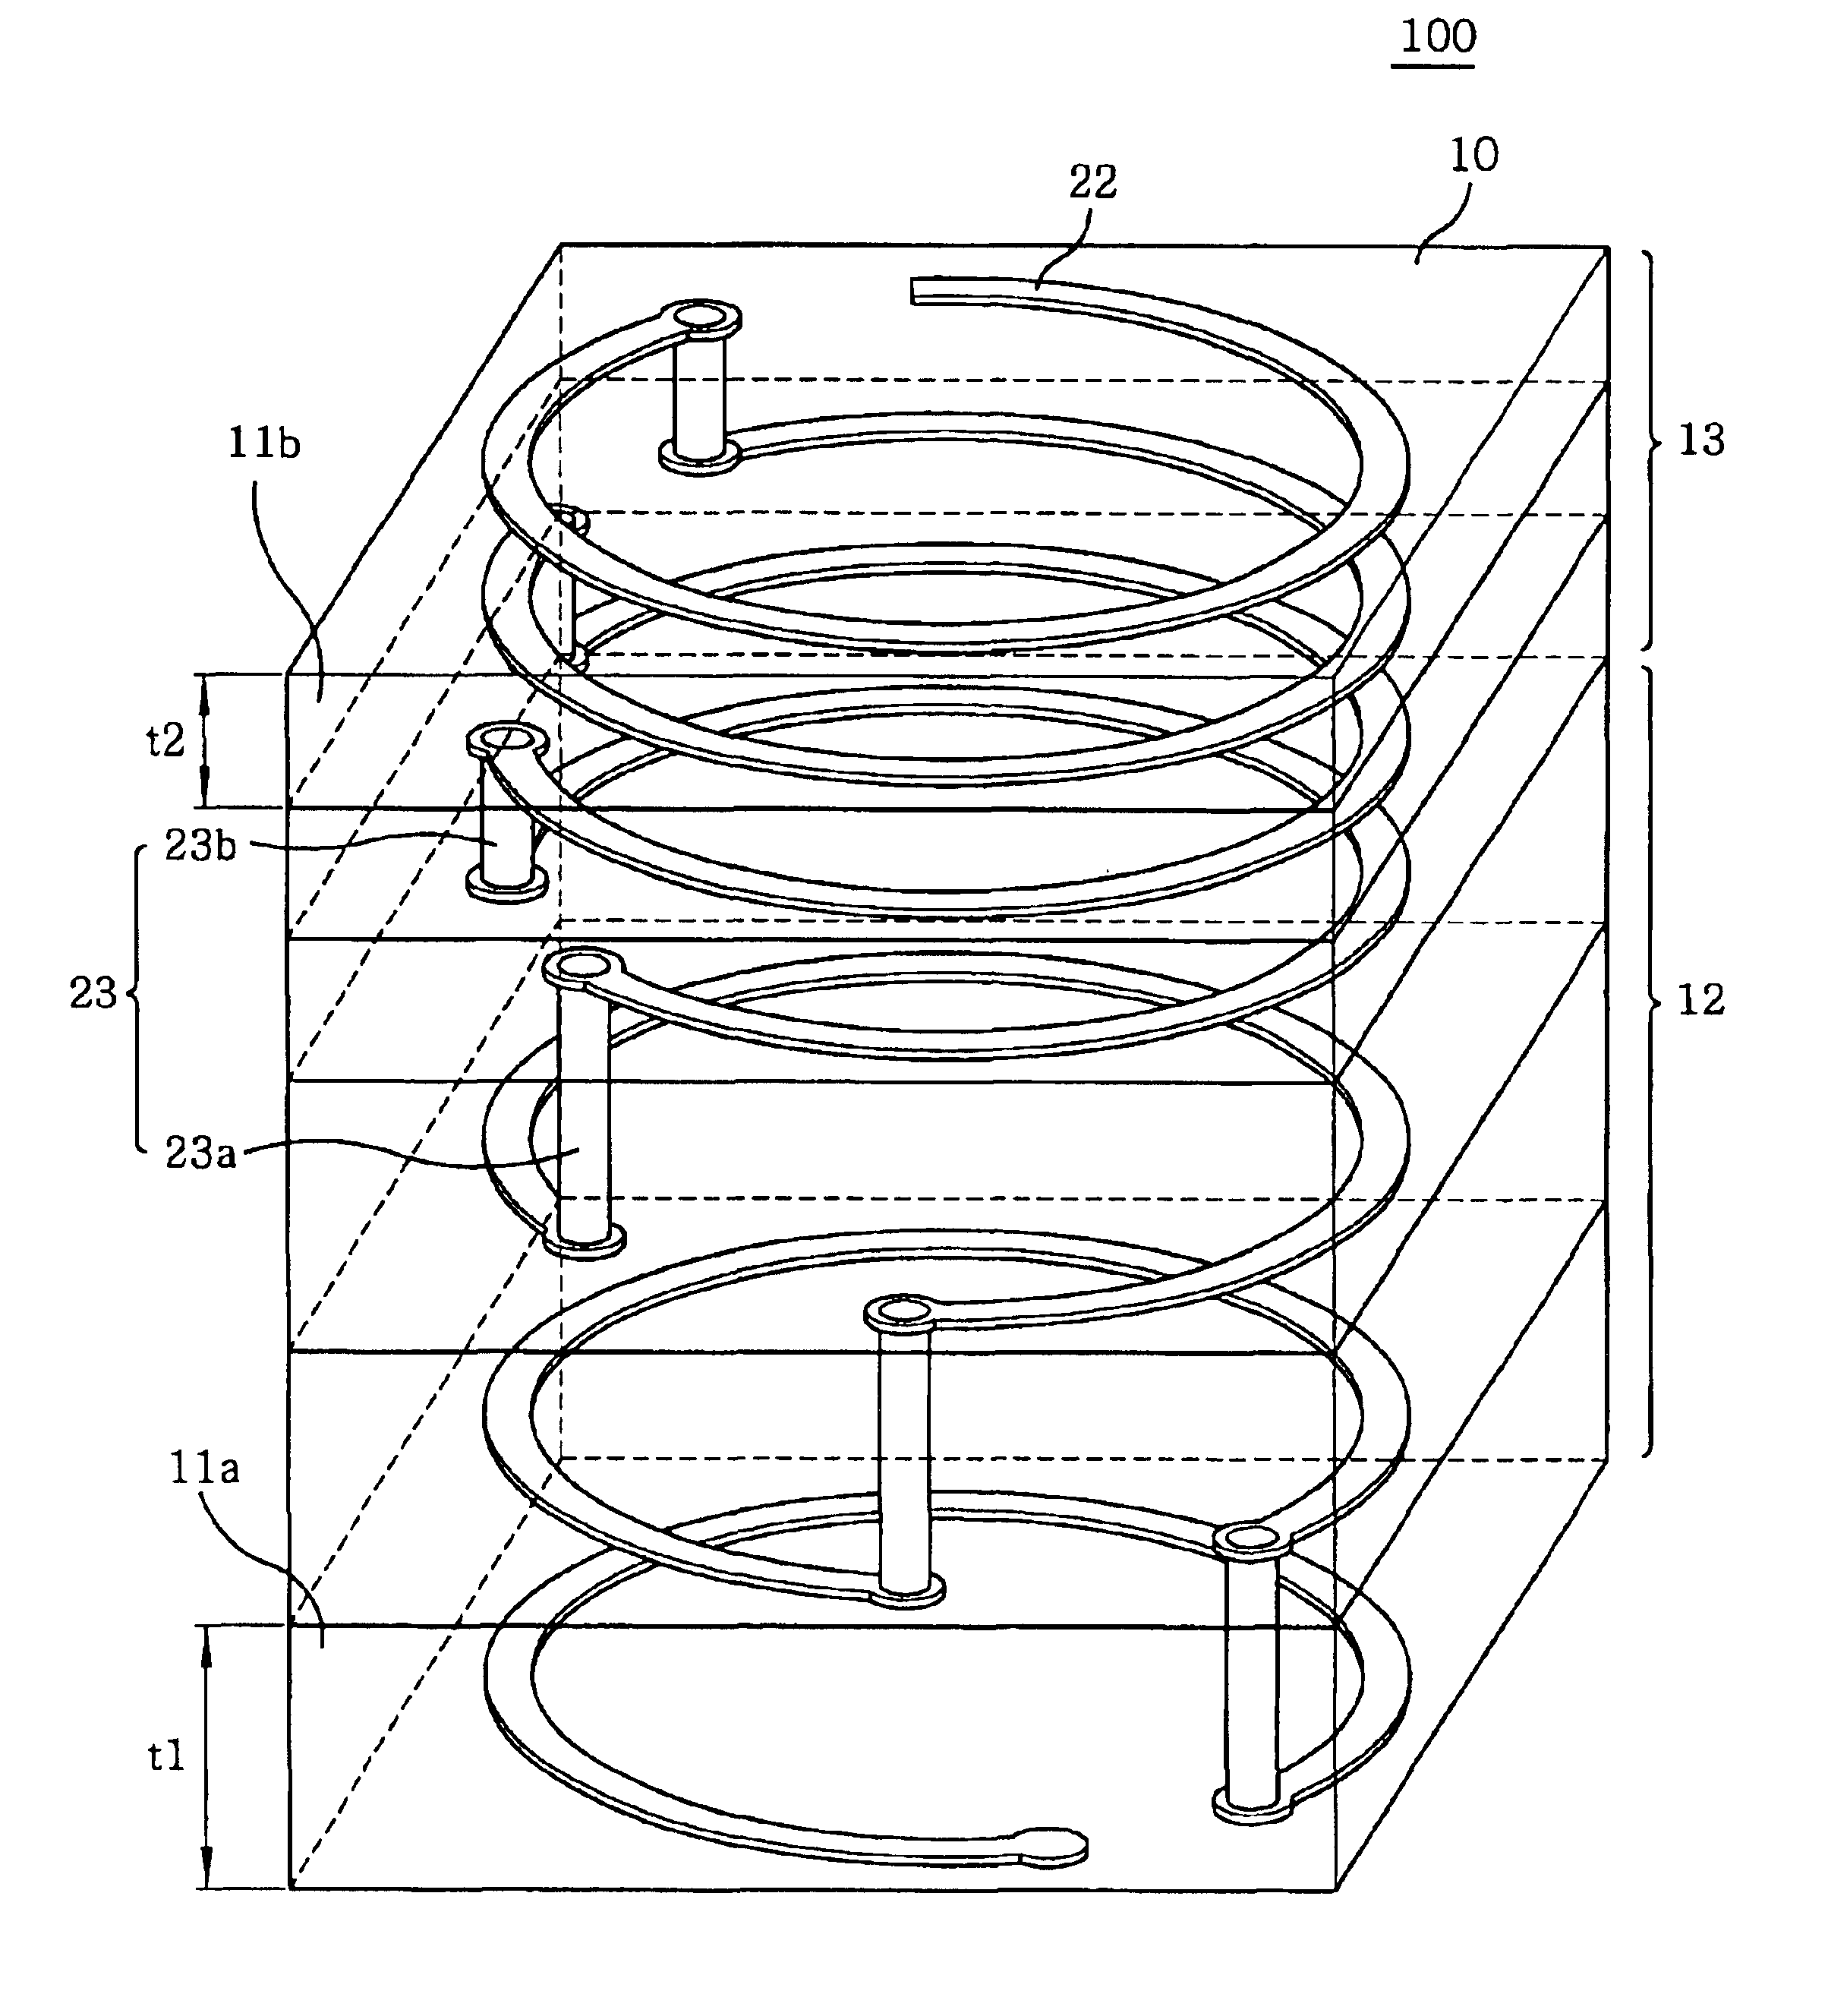 Multi-band helical antenna